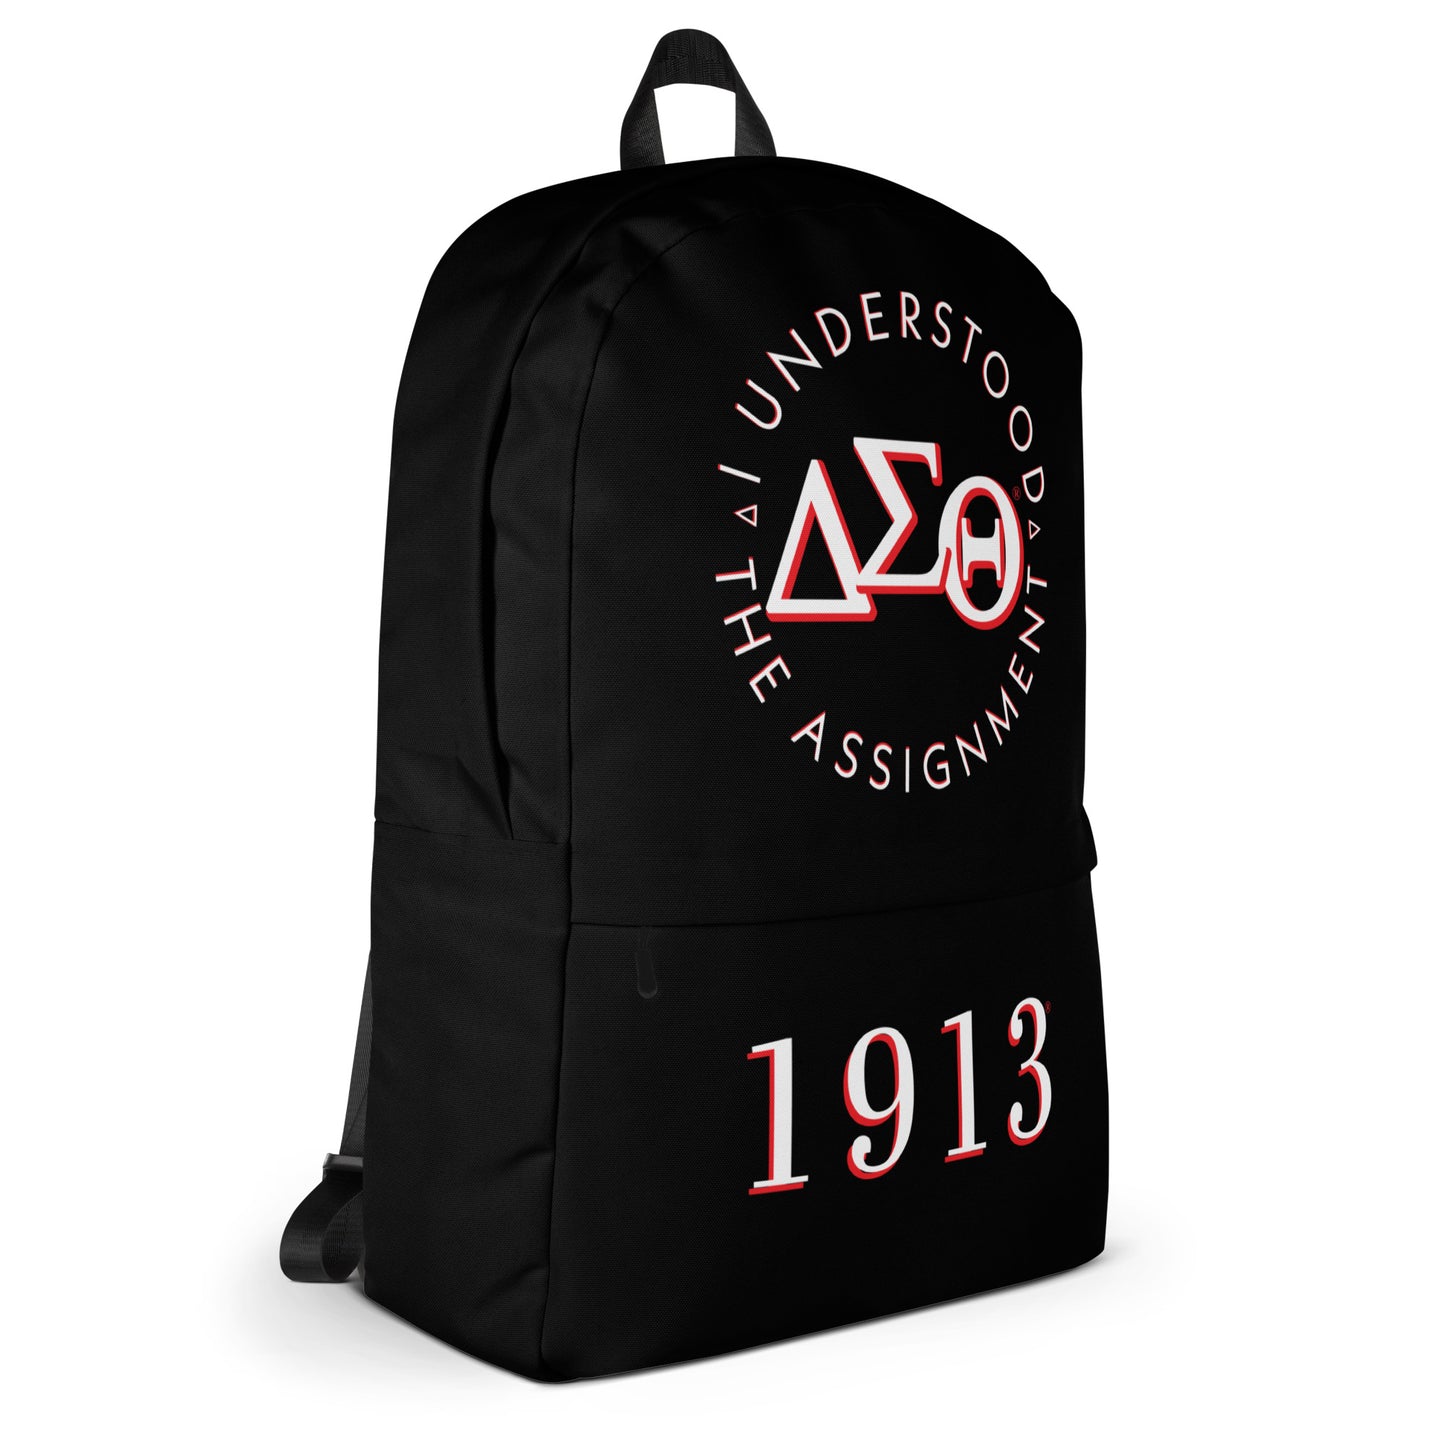 Delta Sigma Theta "The Assignment" Minimalist Backpack